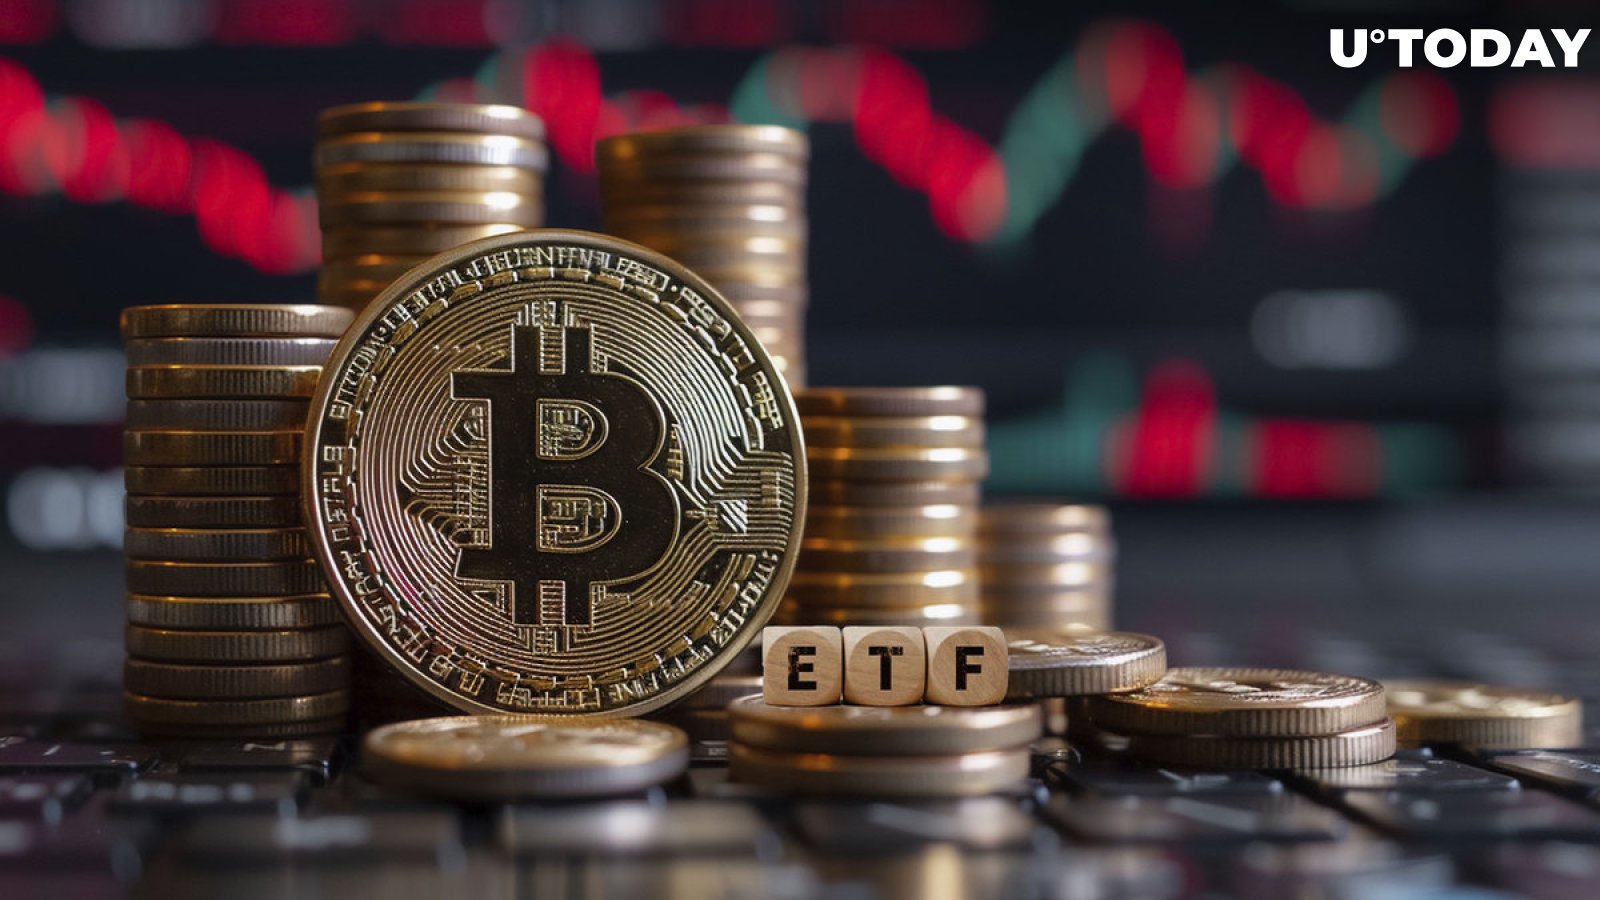 All Bitcoin ETFs Are Exiting Their Holdings